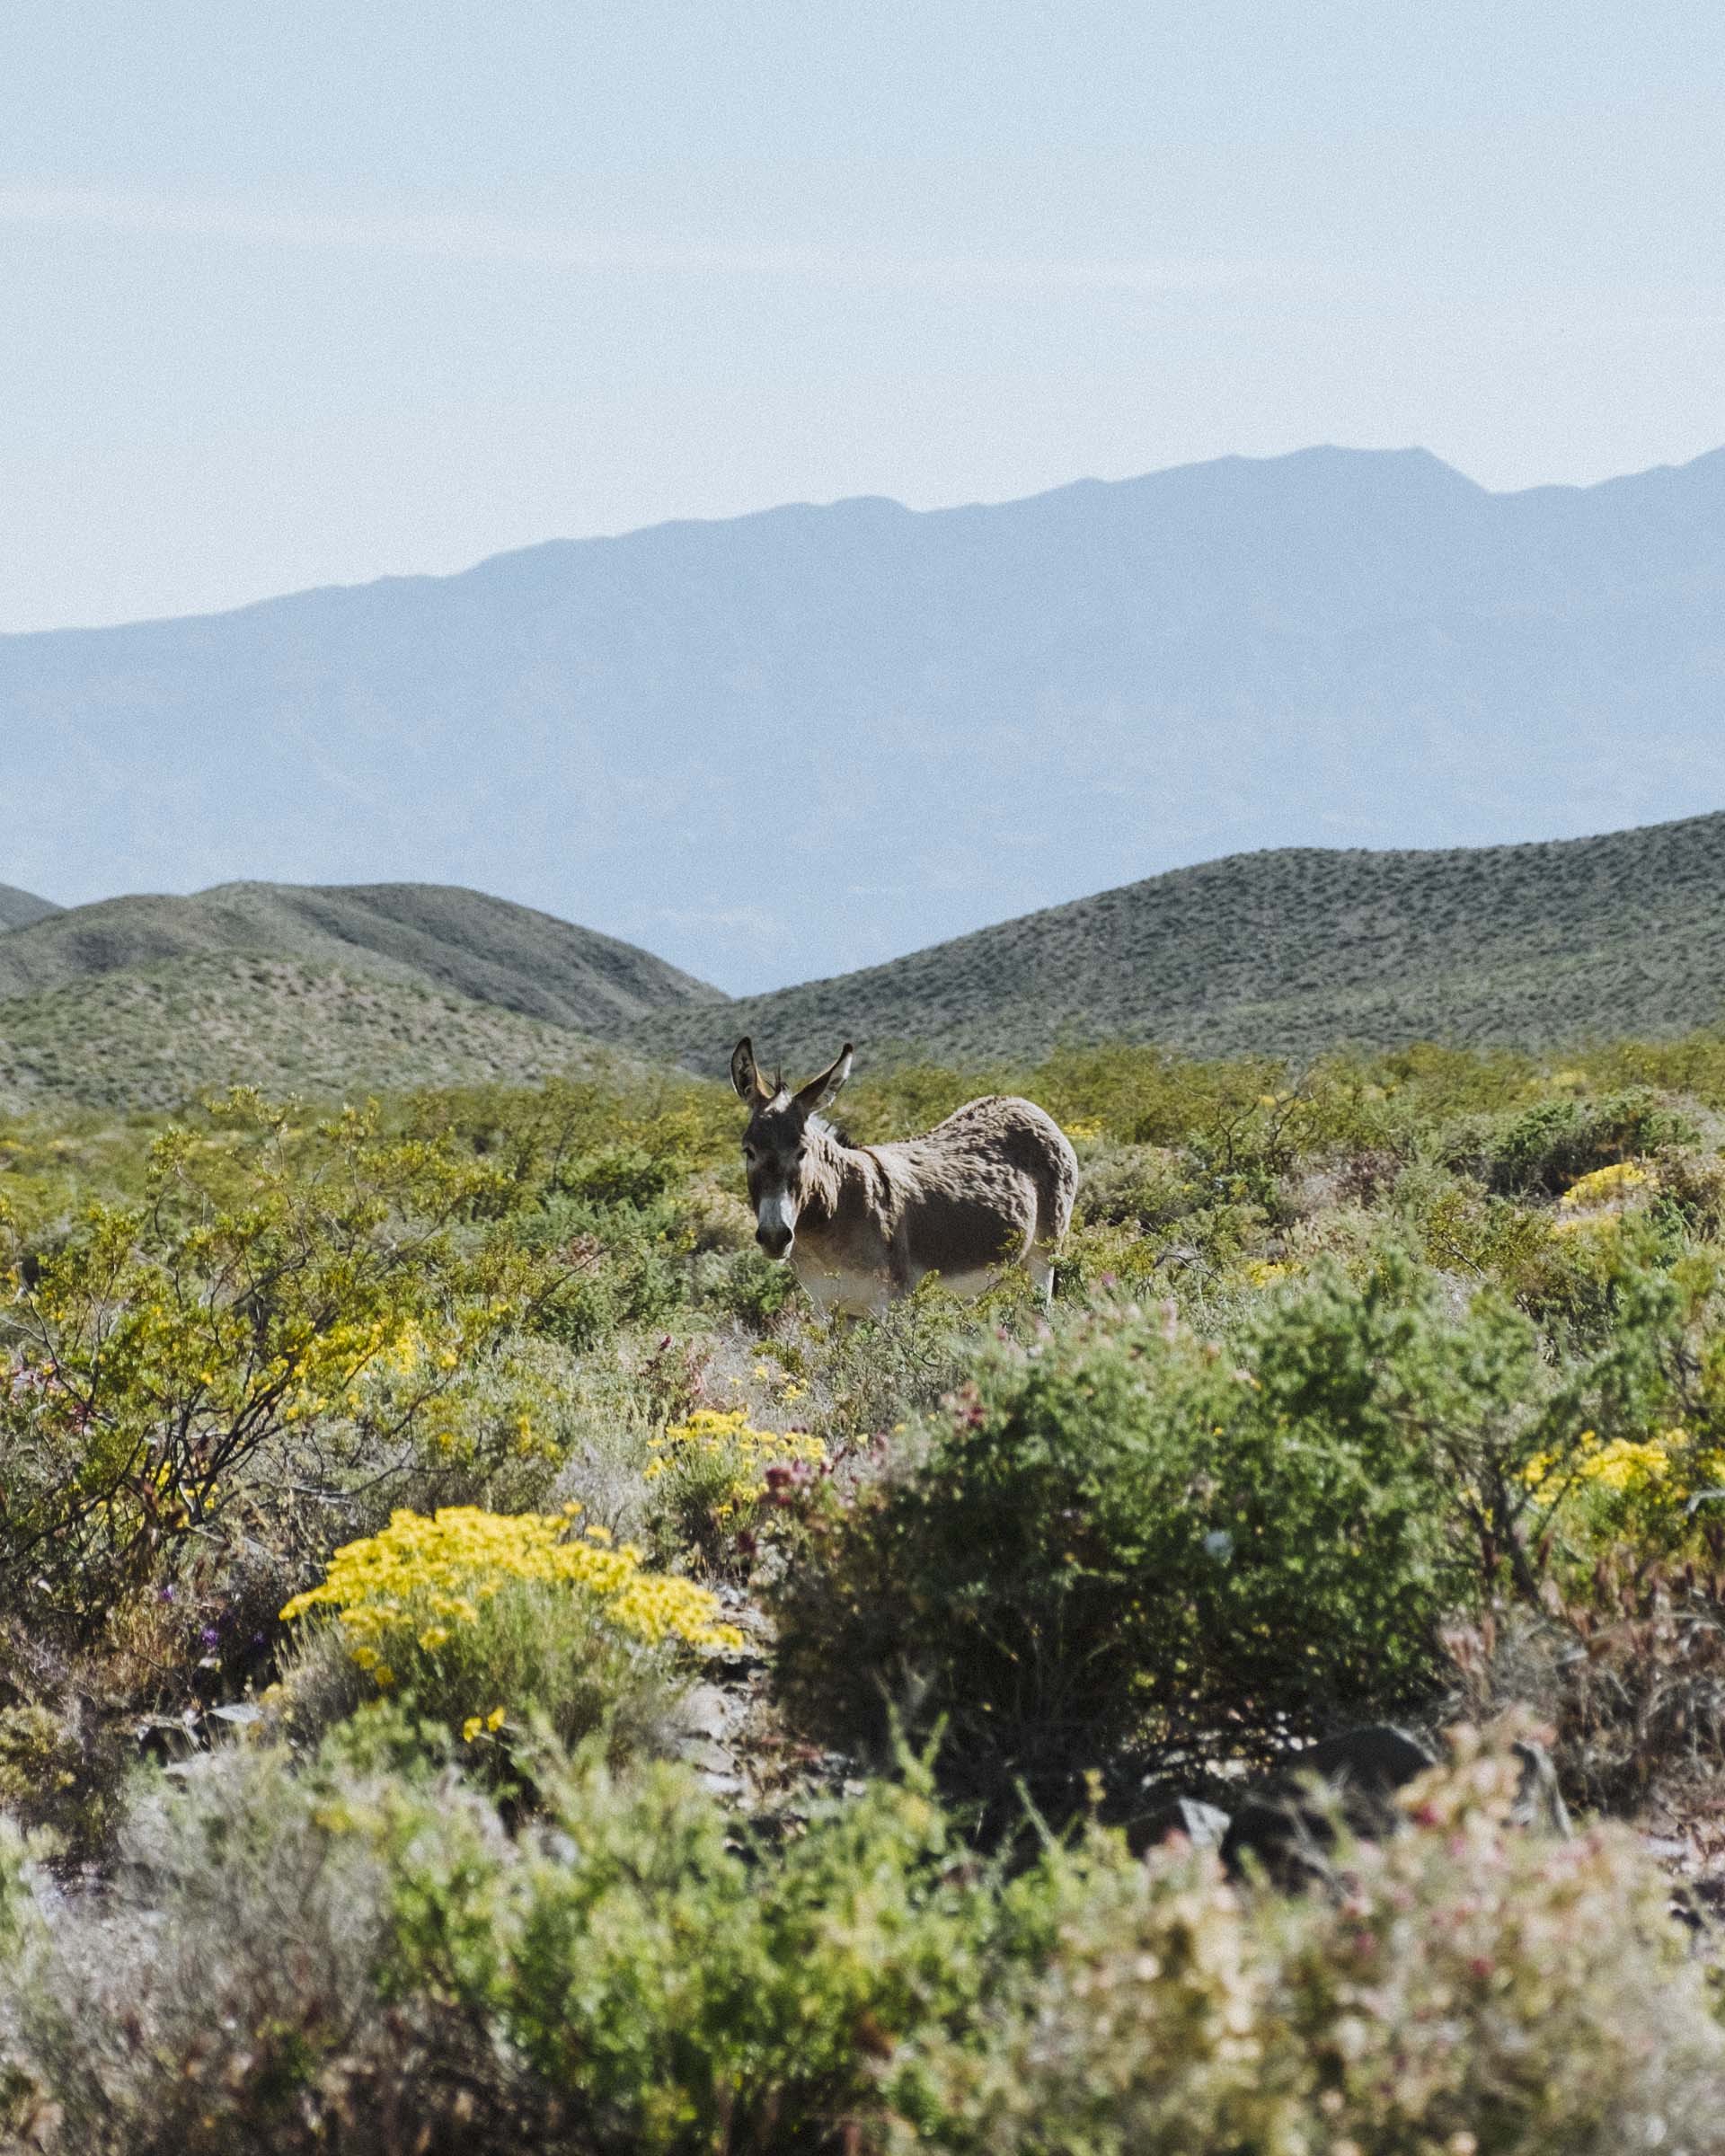 A wild donkey of Death Valley, California